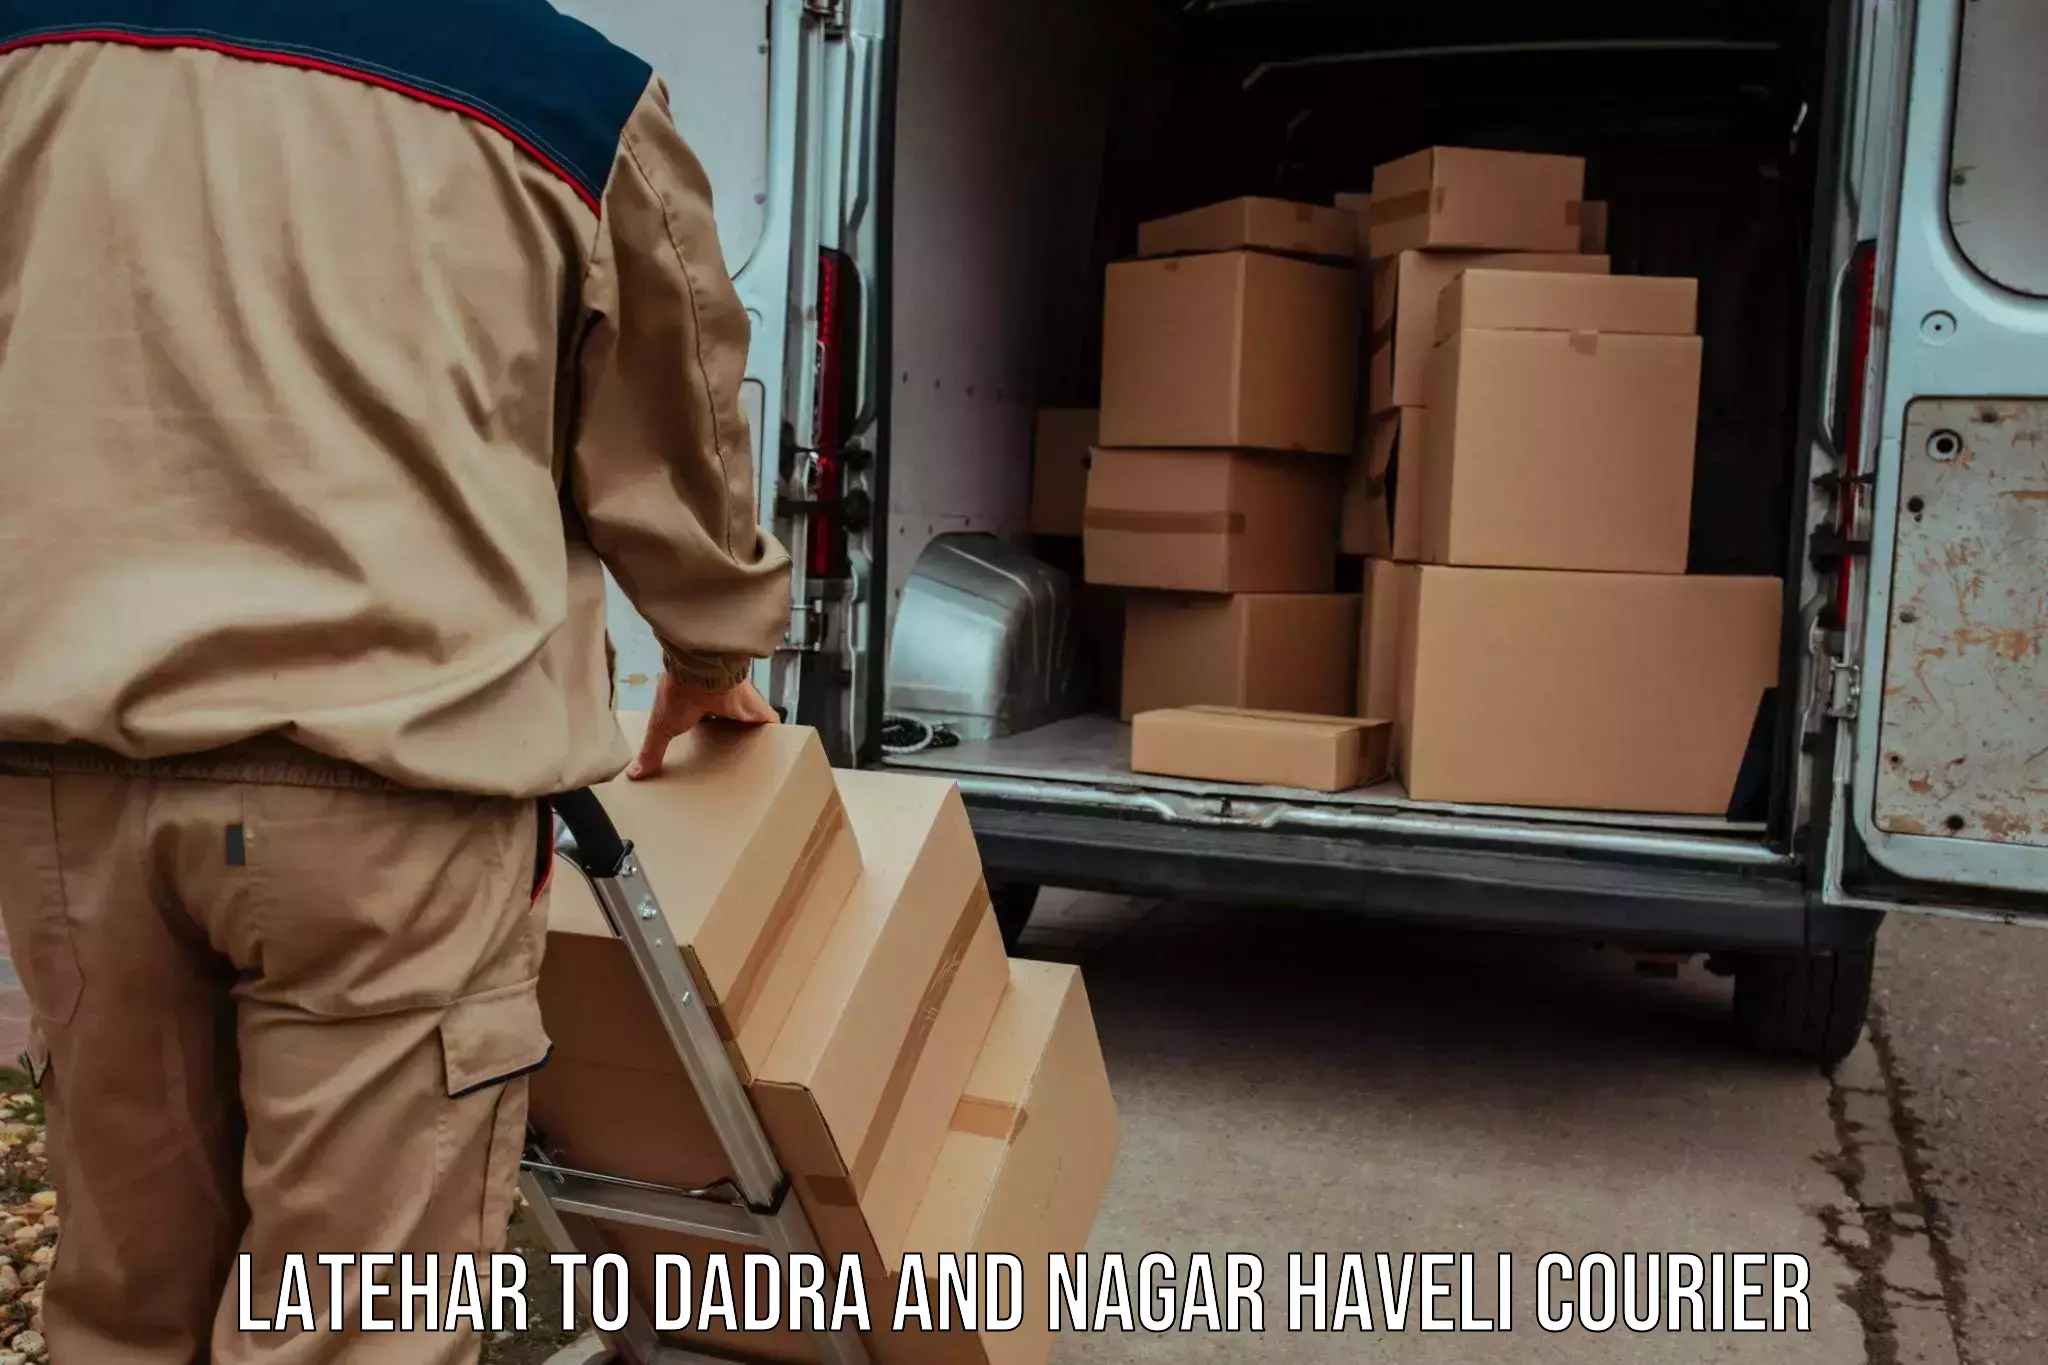 Courier service booking Latehar to Dadra and Nagar Haveli